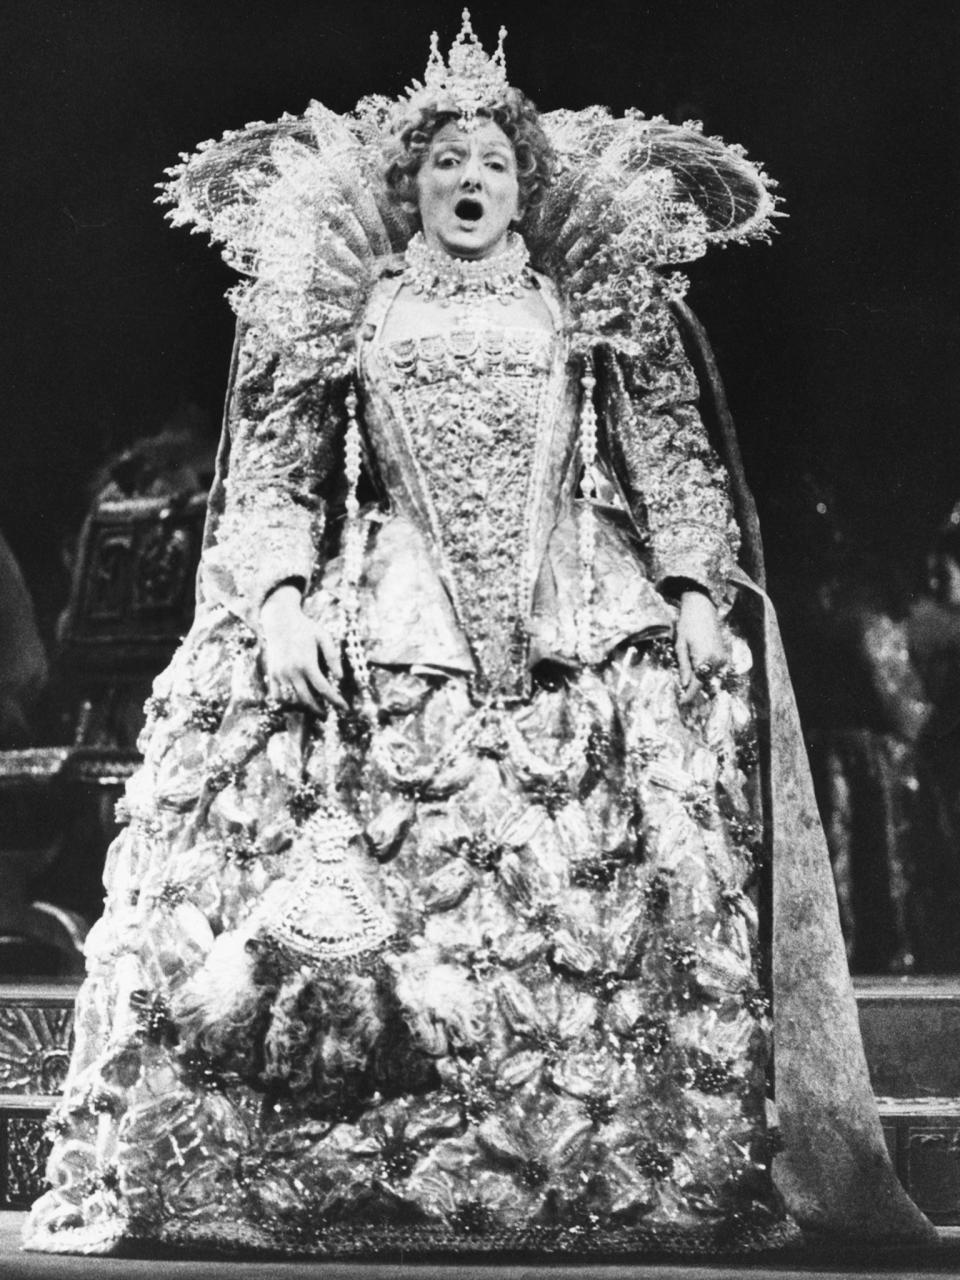 Tinsley as Queen Elizabeth I in Donizetti's ‘Mary Stuart’ at the London ColiseumGetty